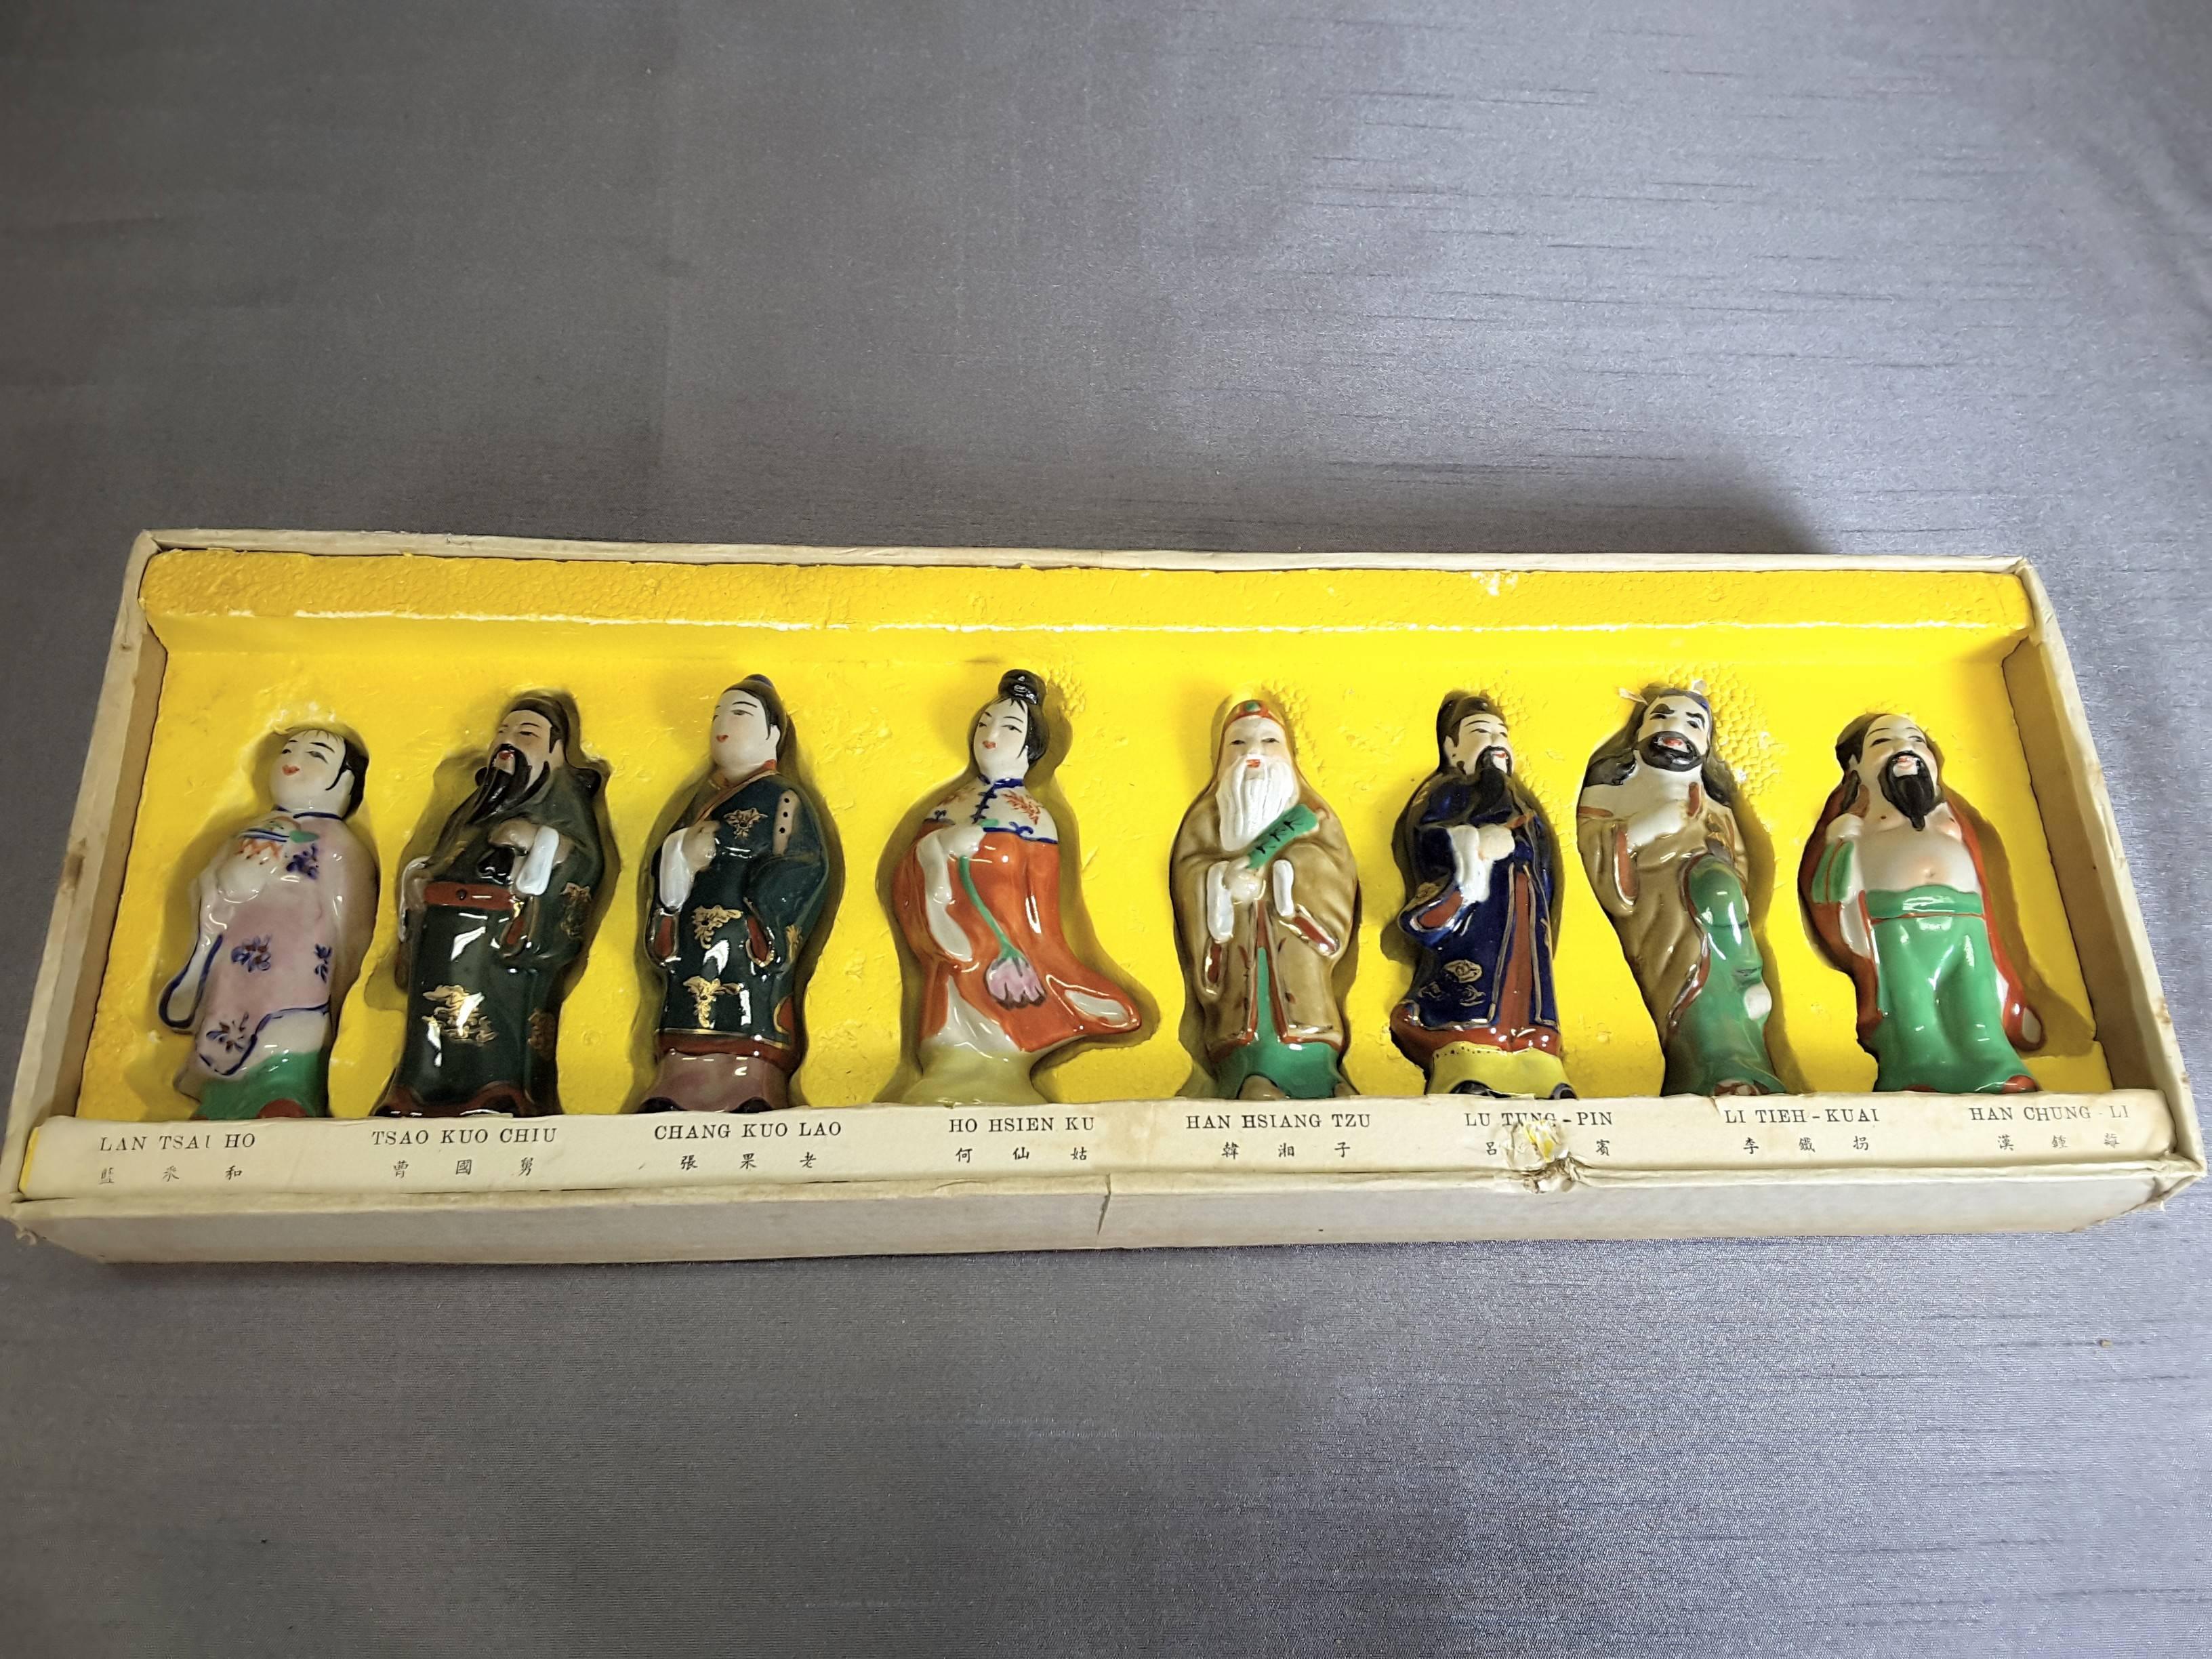 Eight Fairies/Scholars for Queen of Heaven Birthday Party, There are different figures in the original 1940's box, Made in the Republic of China, Yu-Fung. They are handpainted and each figurine is a different color. The inside top cover has the